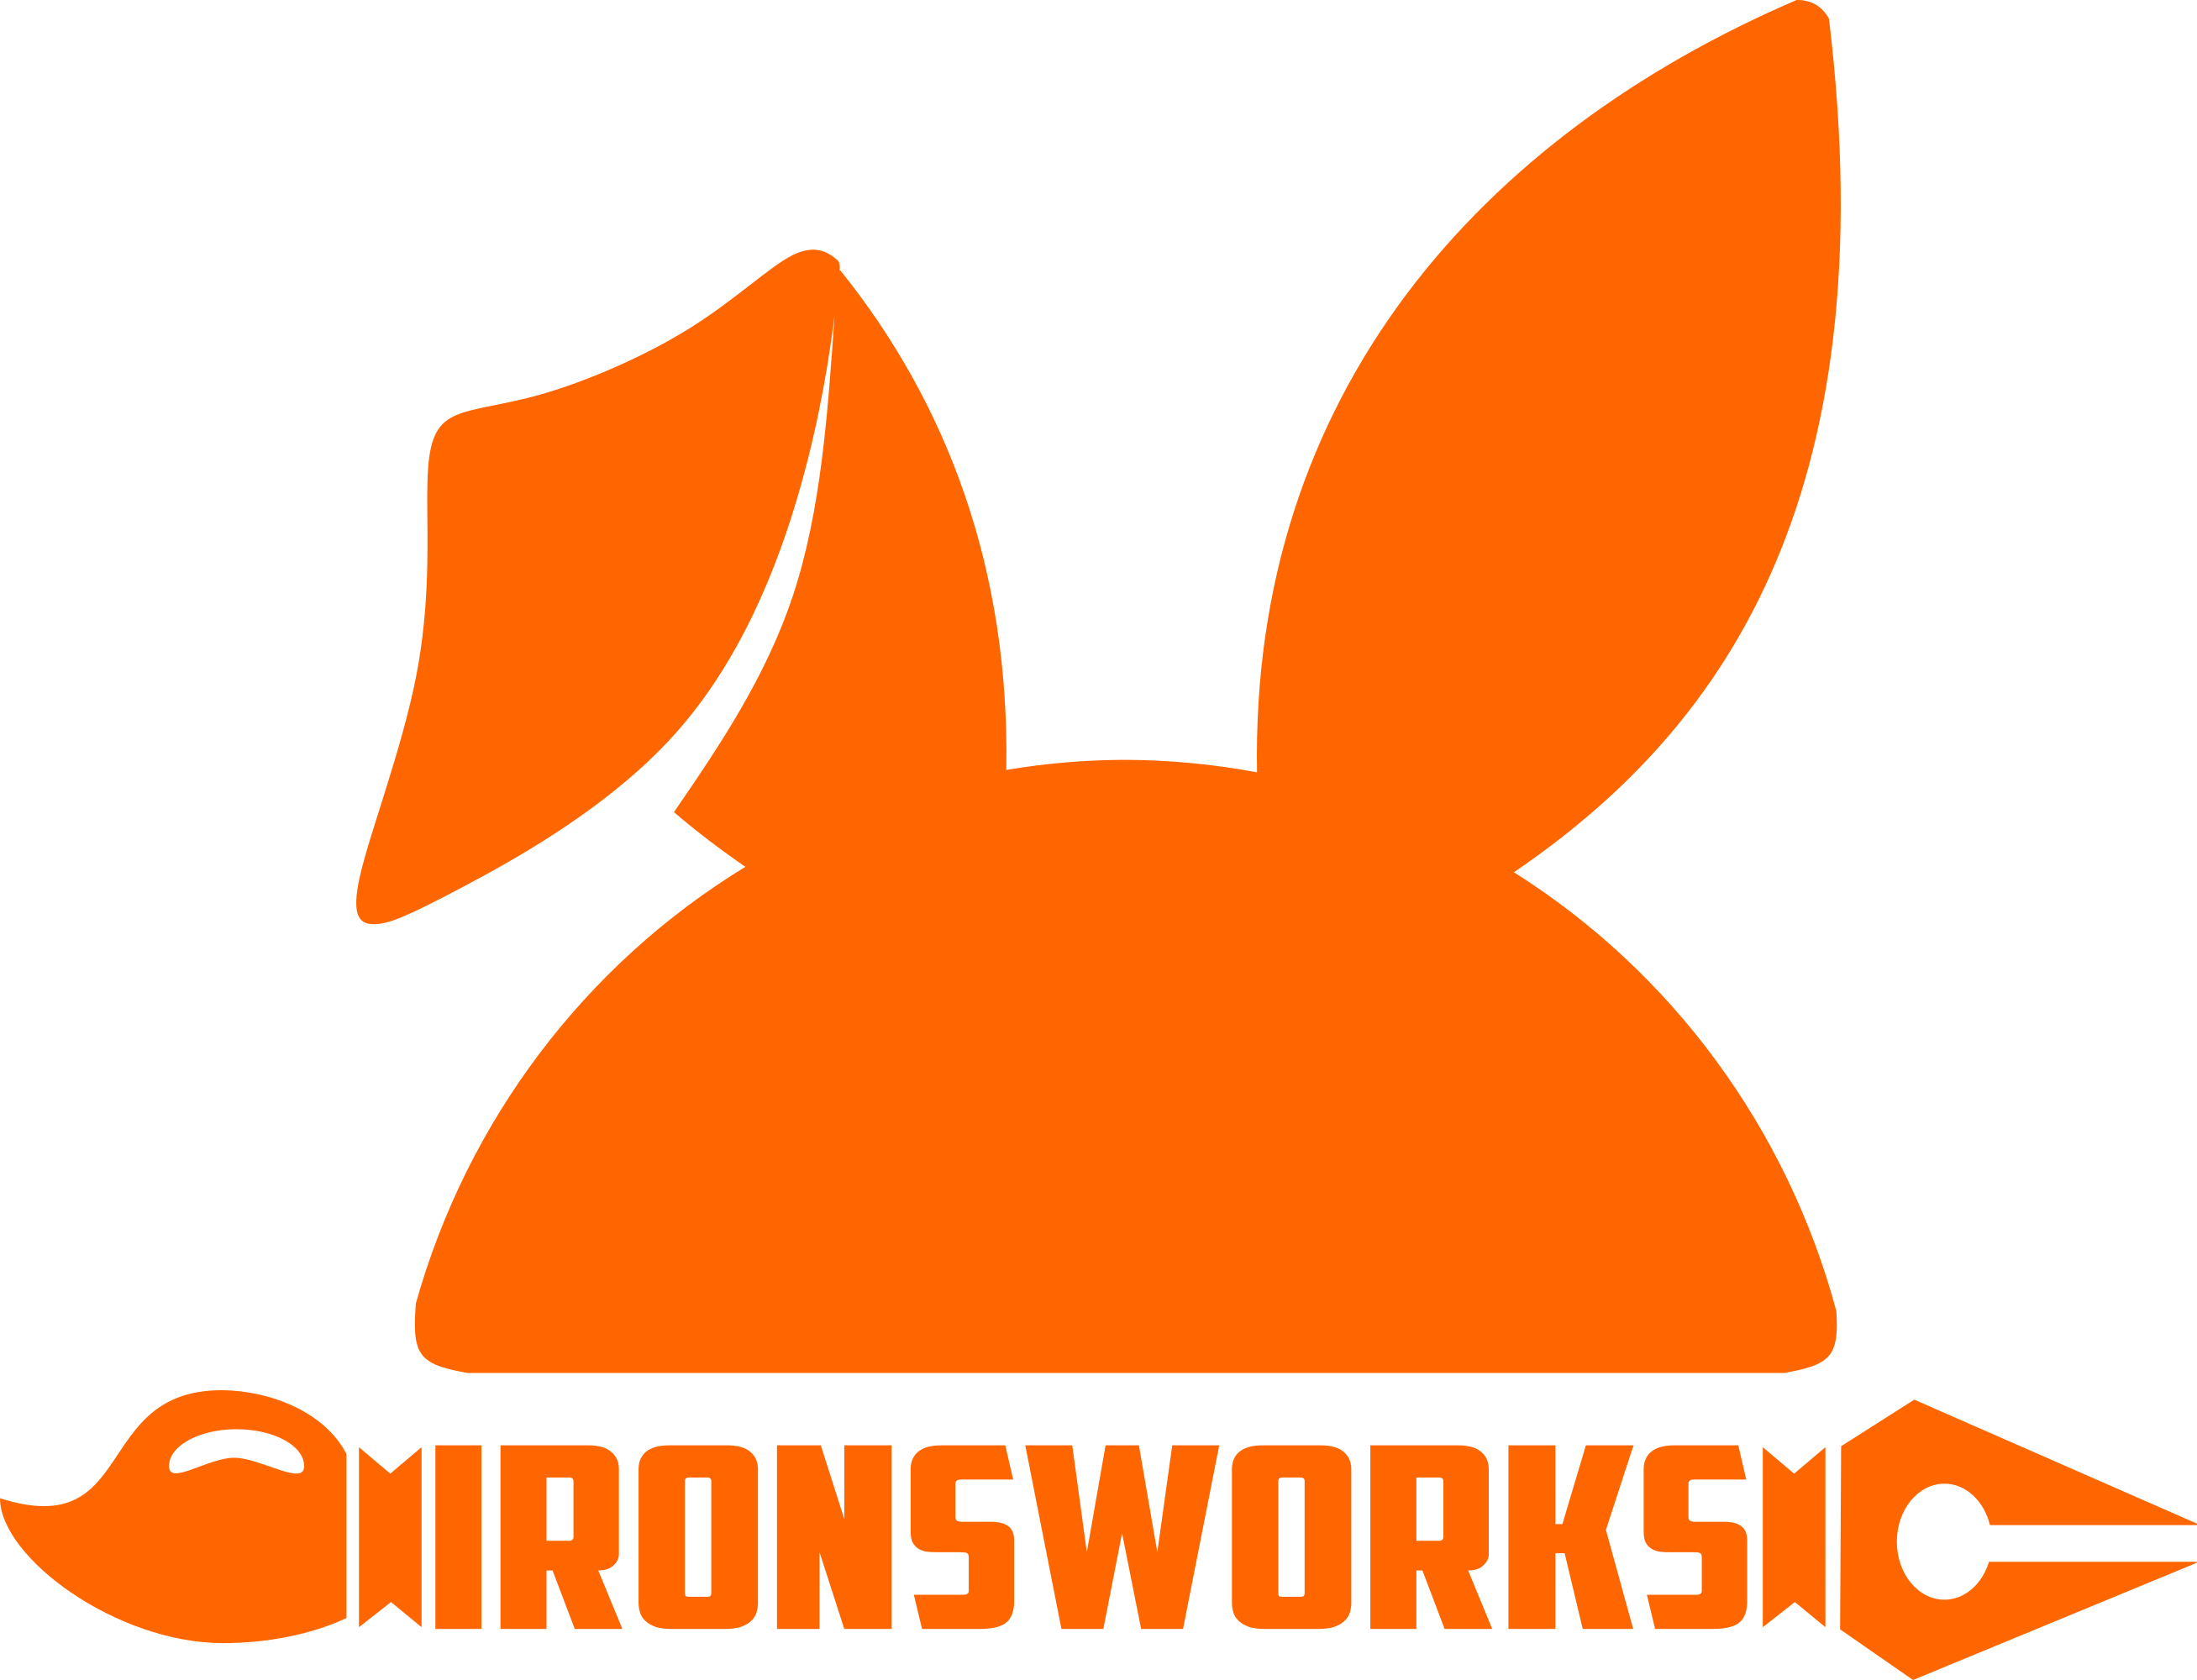 Buy IronSWorks a Coffee. /ironsworks - Ko-fi ❤️ Where creators get  support from fans through donations, memberships, shop sales and more! The  original 'Buy Me a Coffee' Page.